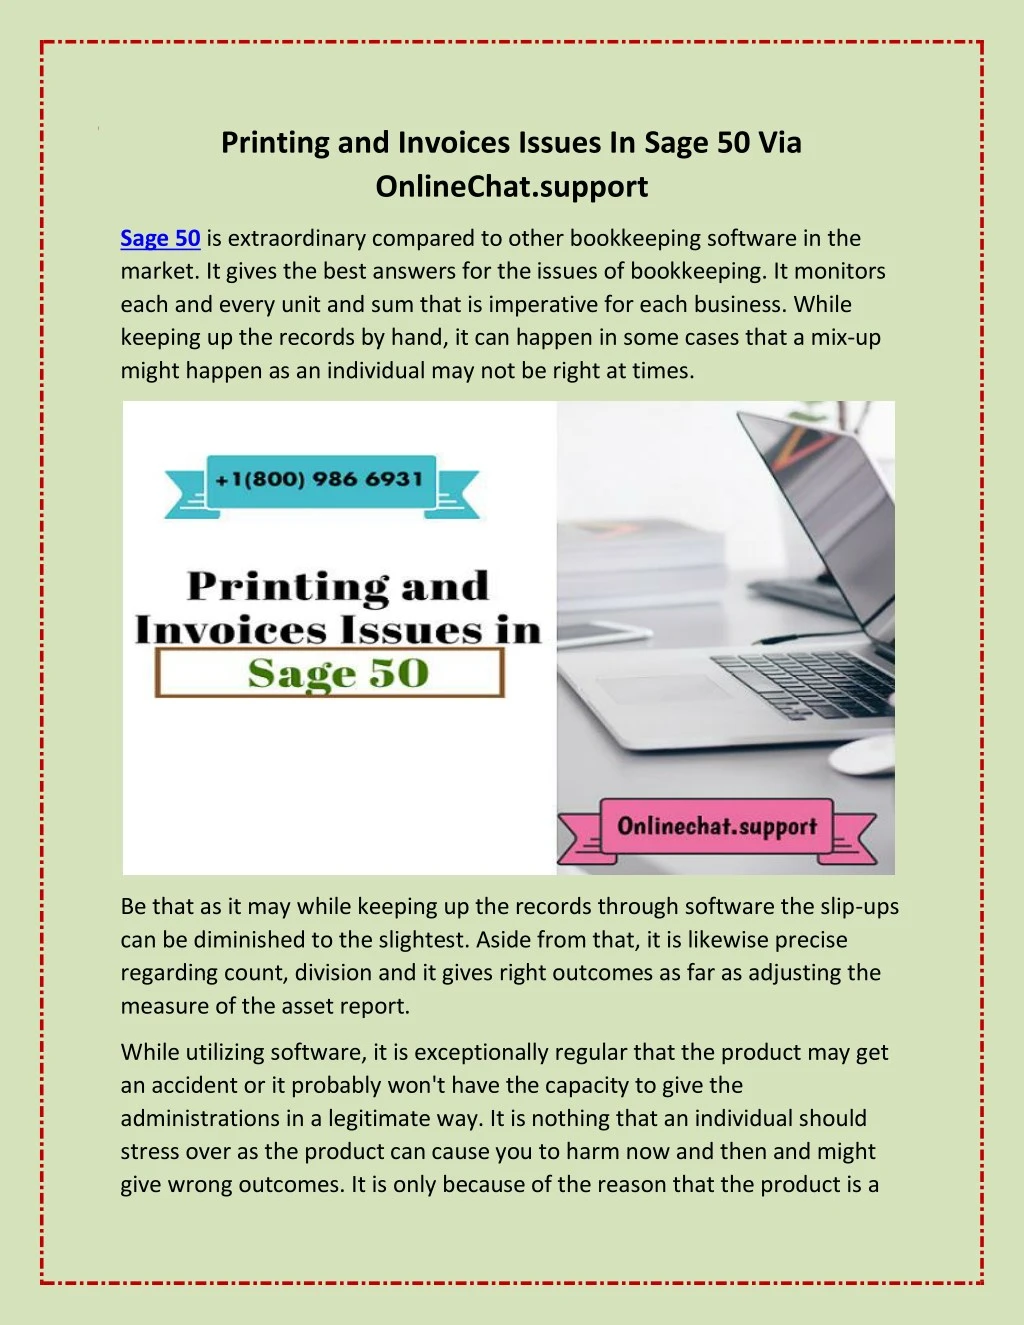 printing and invoices issues in sage